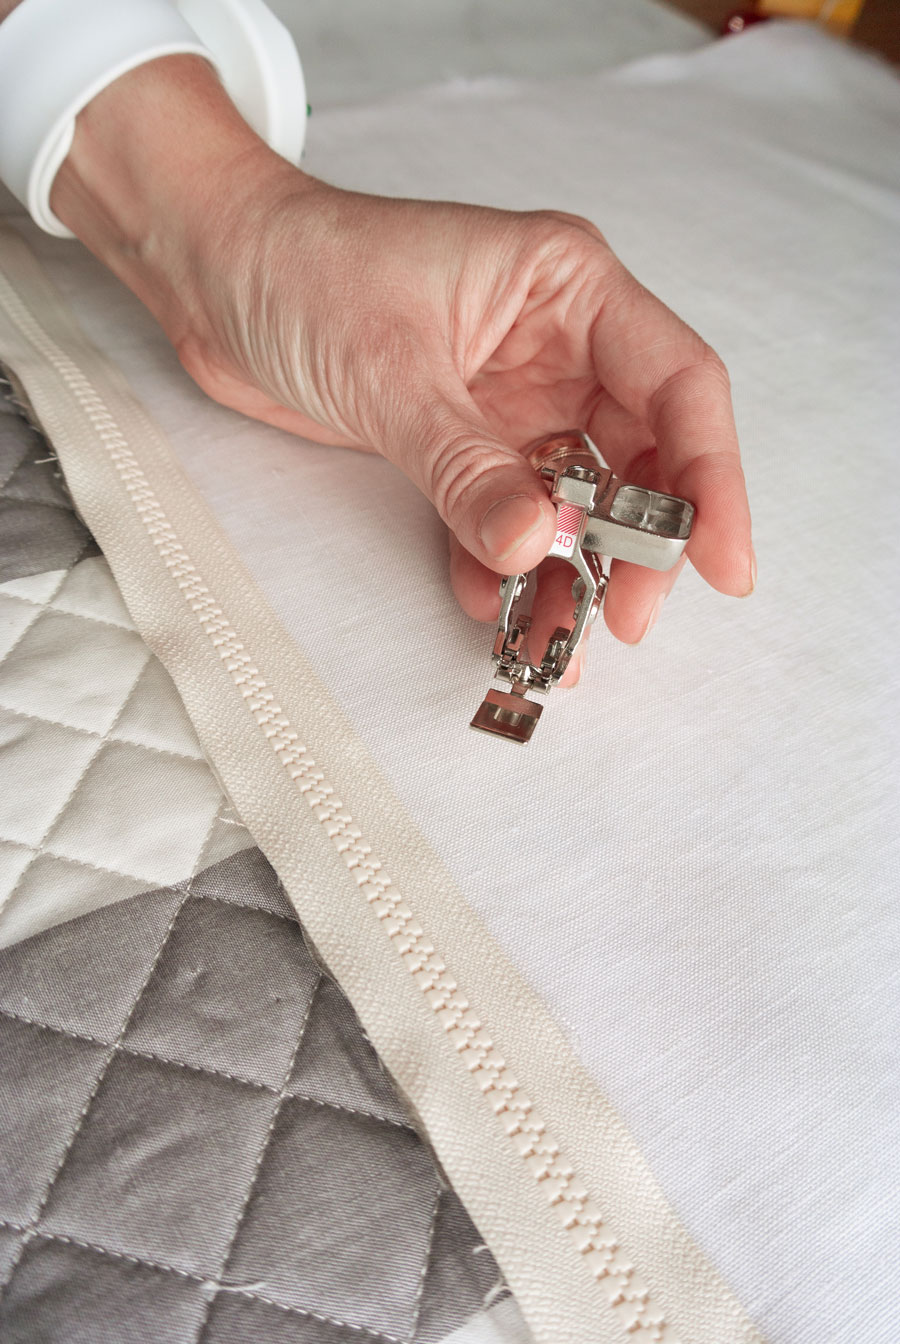 Elegant Quilted Pillow DIY! Sew a quilted zipper pillow with this step by step tutorial. I'll walk you through how to baste and quilt your pillow top, sew a zipper, and finish the pillow beautifully!